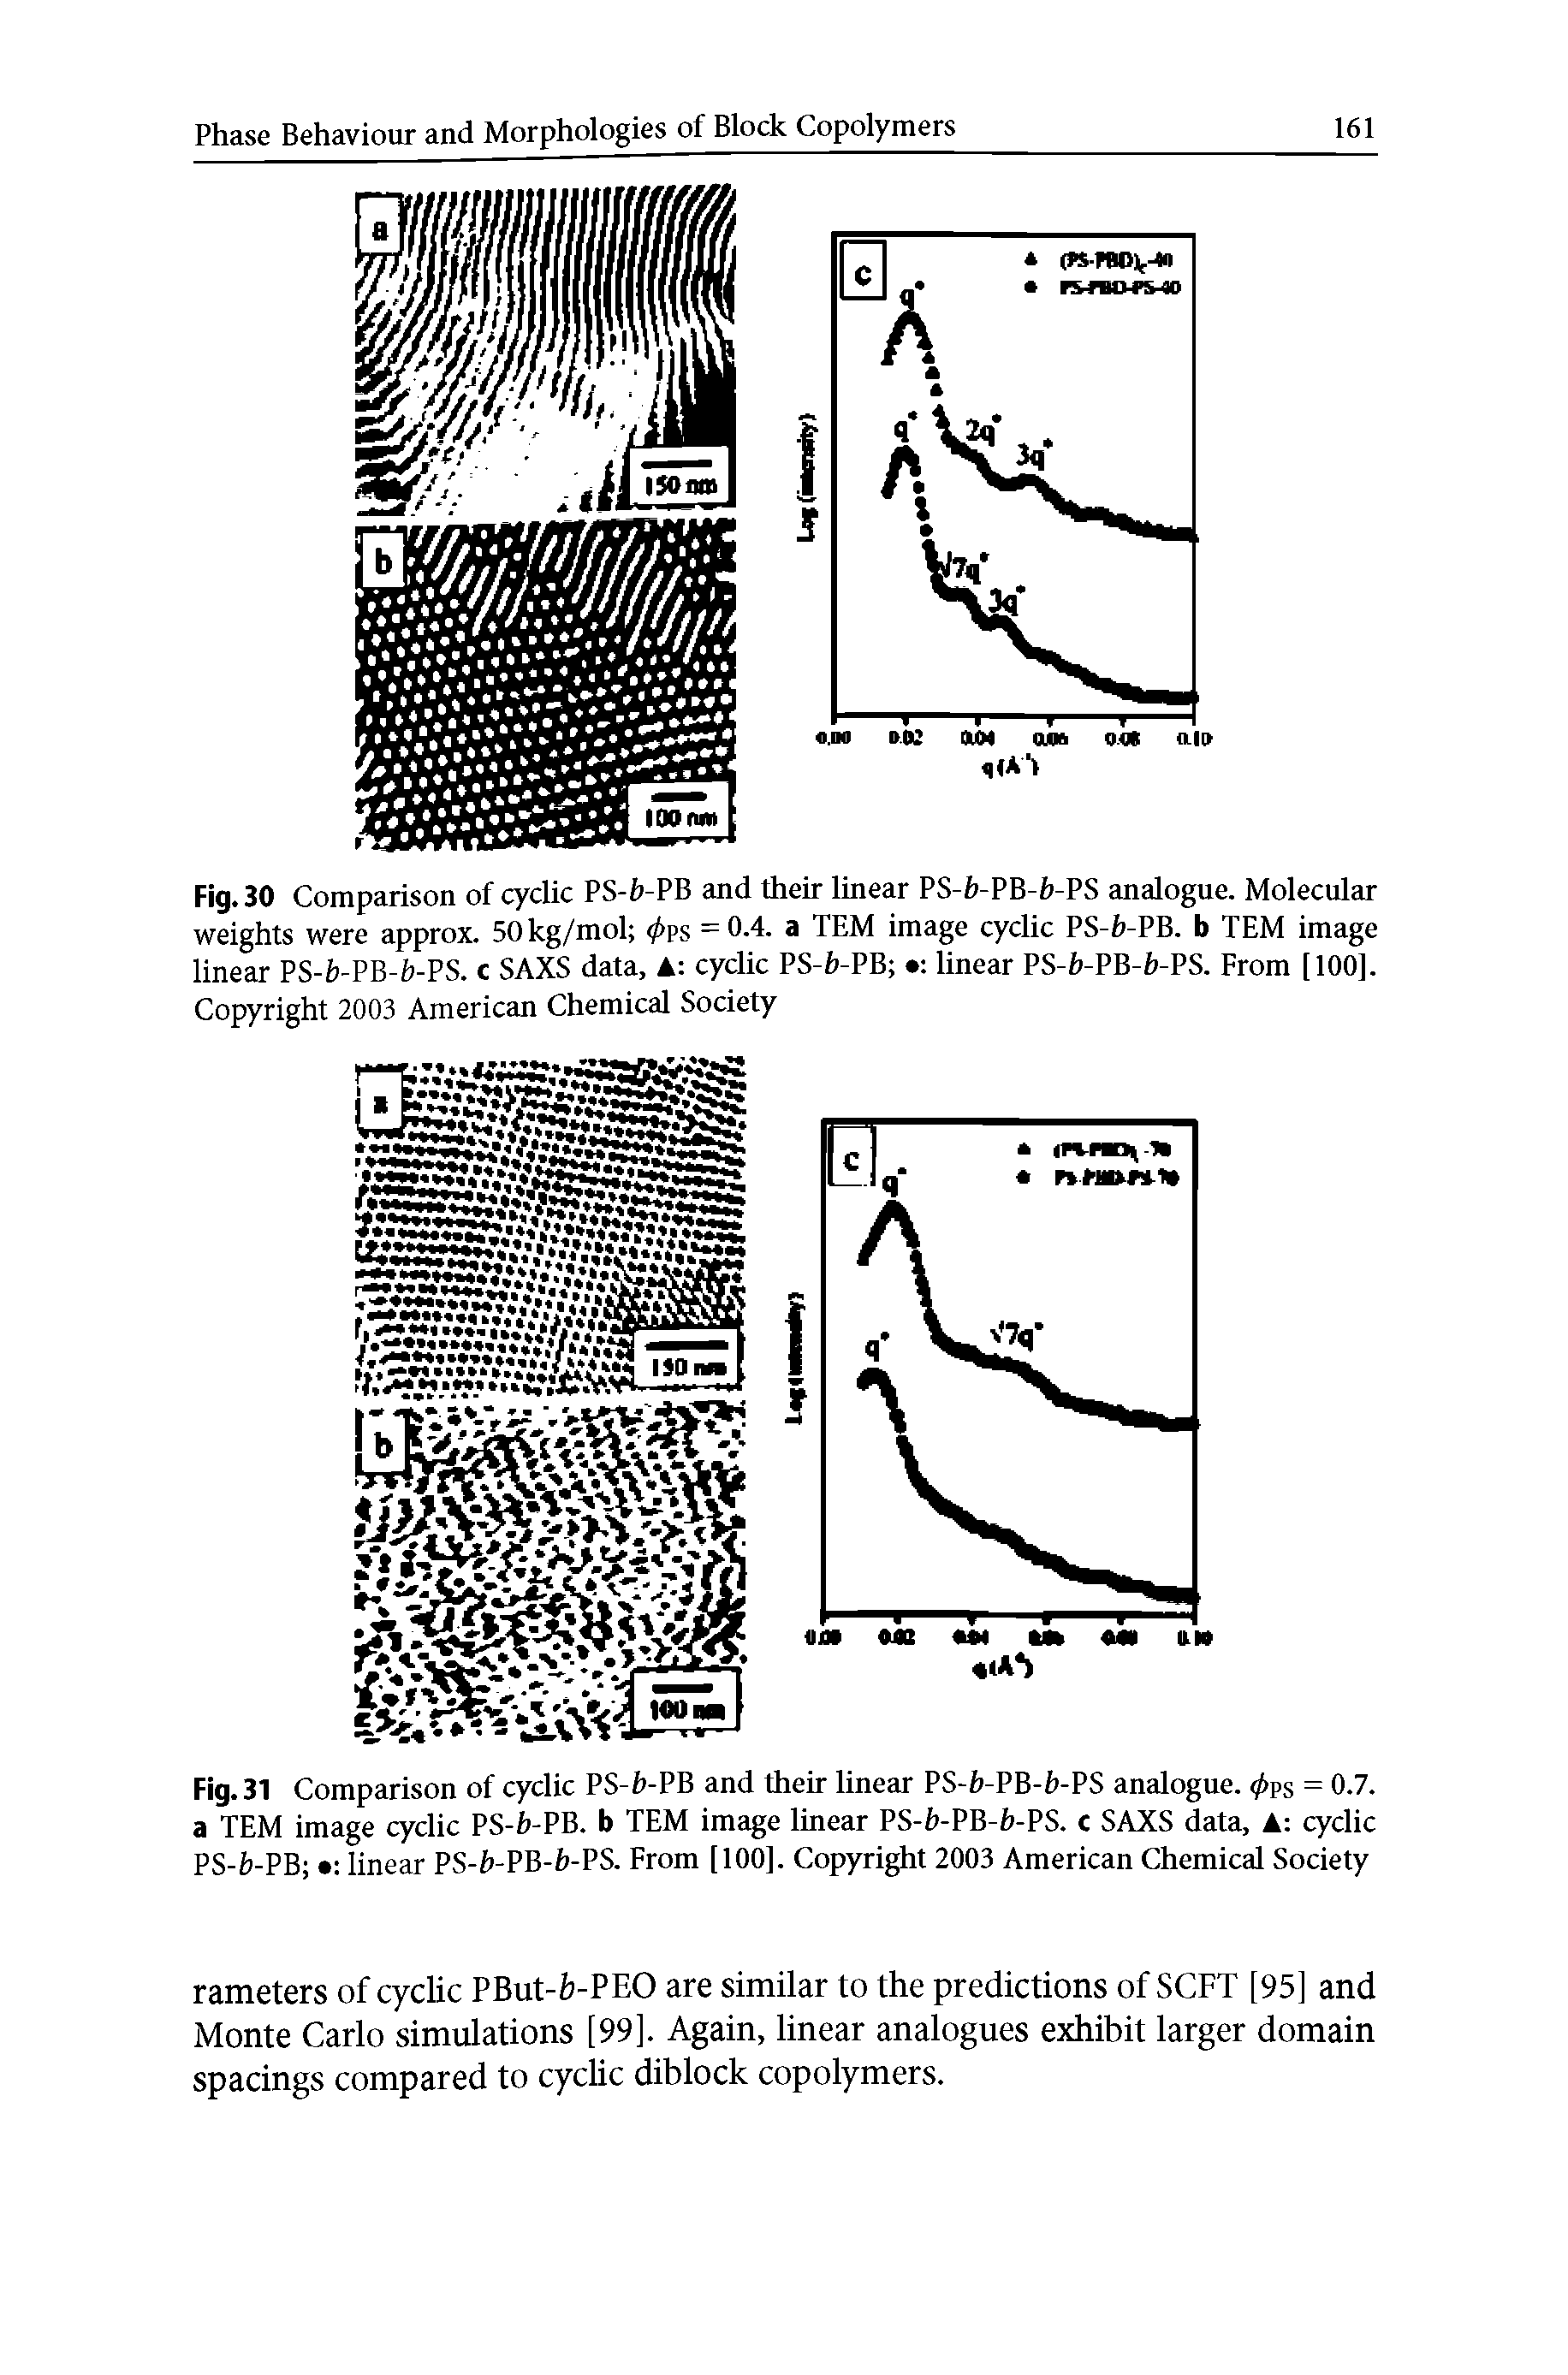 Fig. 30 Comparison of cyclic PS-fc-PB and their linear PS-b-PB-b-PS analogue. Molecular weights were approx. 50kg/mol </->ps = 0.4. a TEM image cyclic PS-b-PB. b TEM image linear PS-b-PB-b-PS. c SAXS data, A cyclic PS-b-PB linear PS-b-PB-b-PS. From [100], Copyright 2003 American Chemical Society...